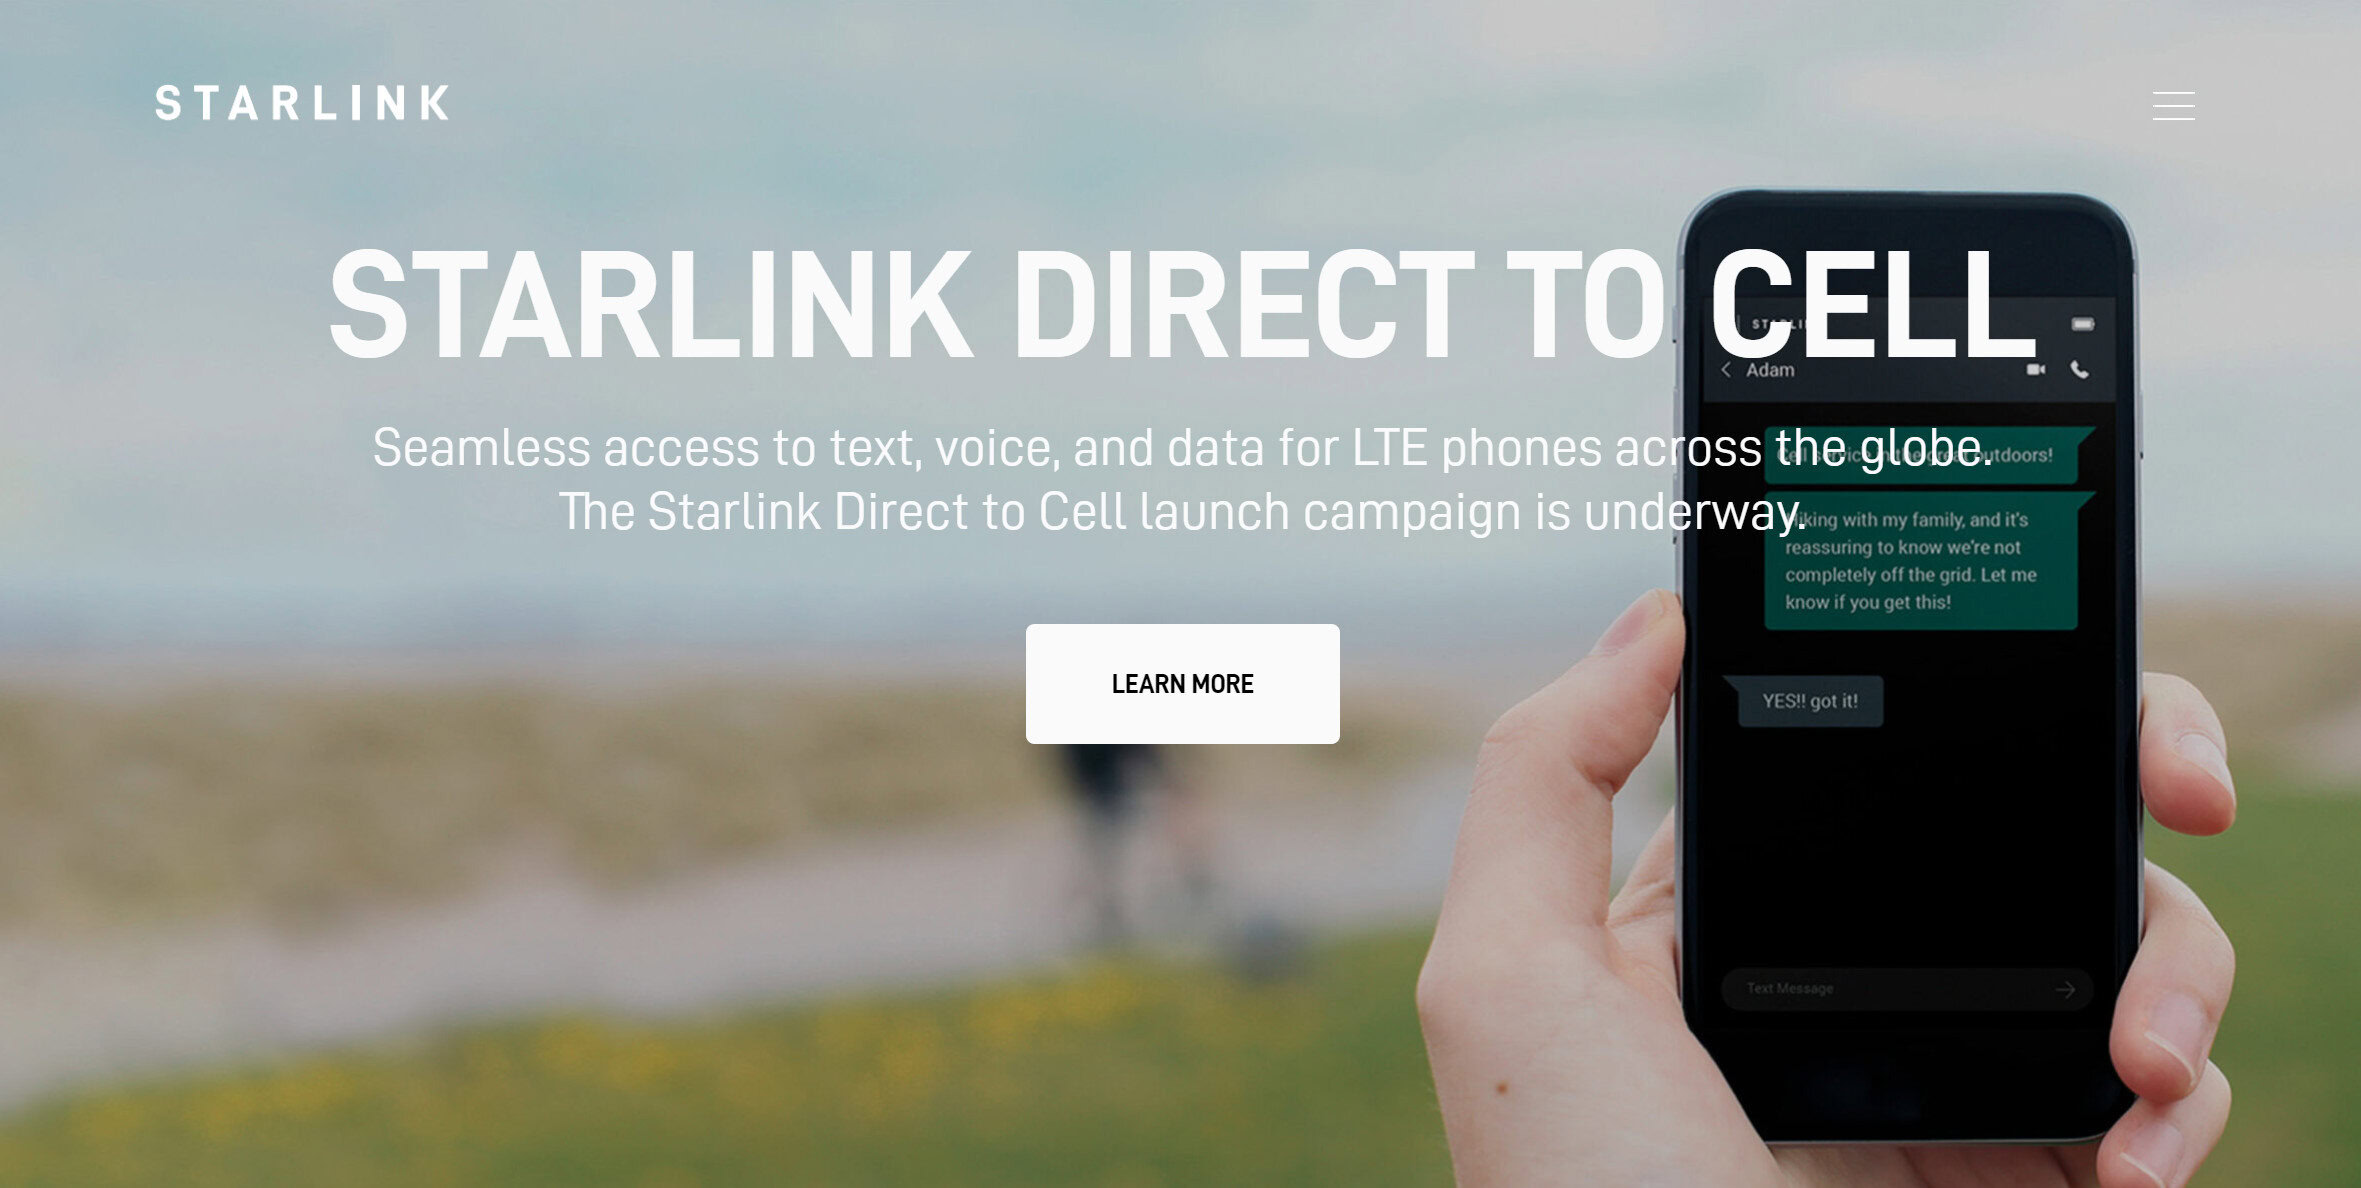 Starlink Direct to Cell landing page